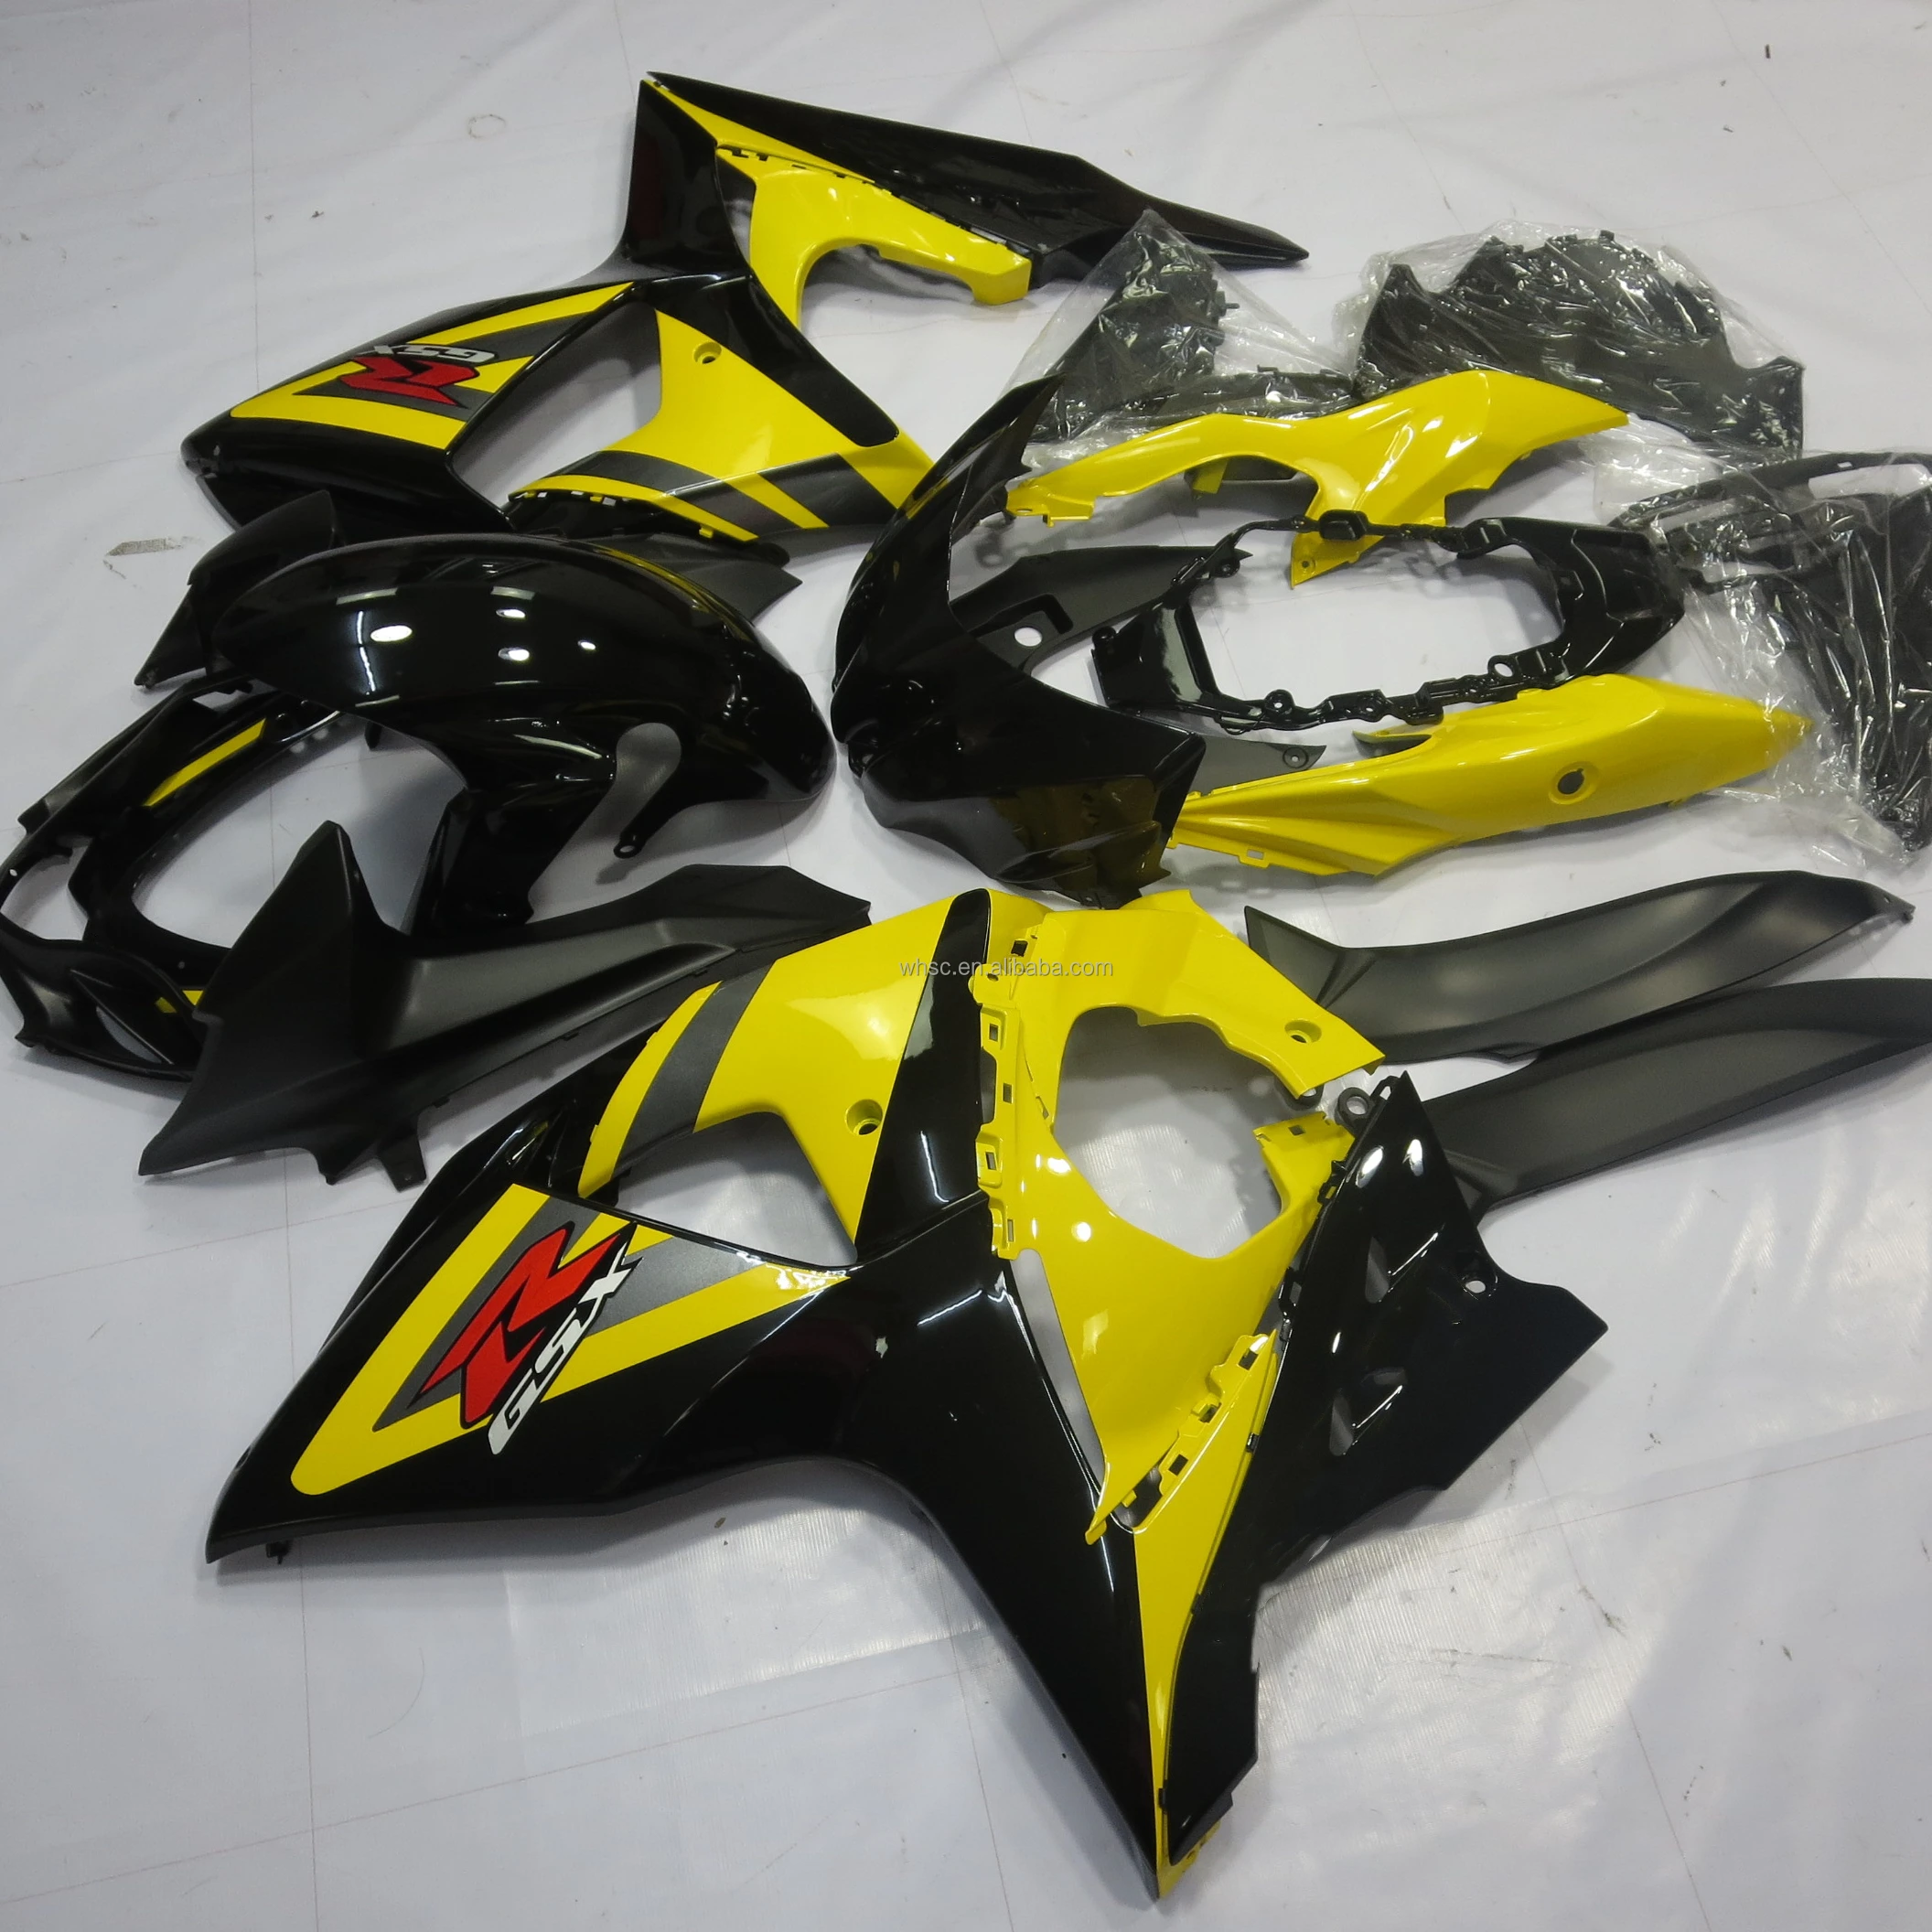 

2022 WHSC yellow black Motorcycle Accessories For SUZUKI GSXR1000 2009-2016 09 K9 Motorcycle Body Systems Fairing Kits, Pictures shown